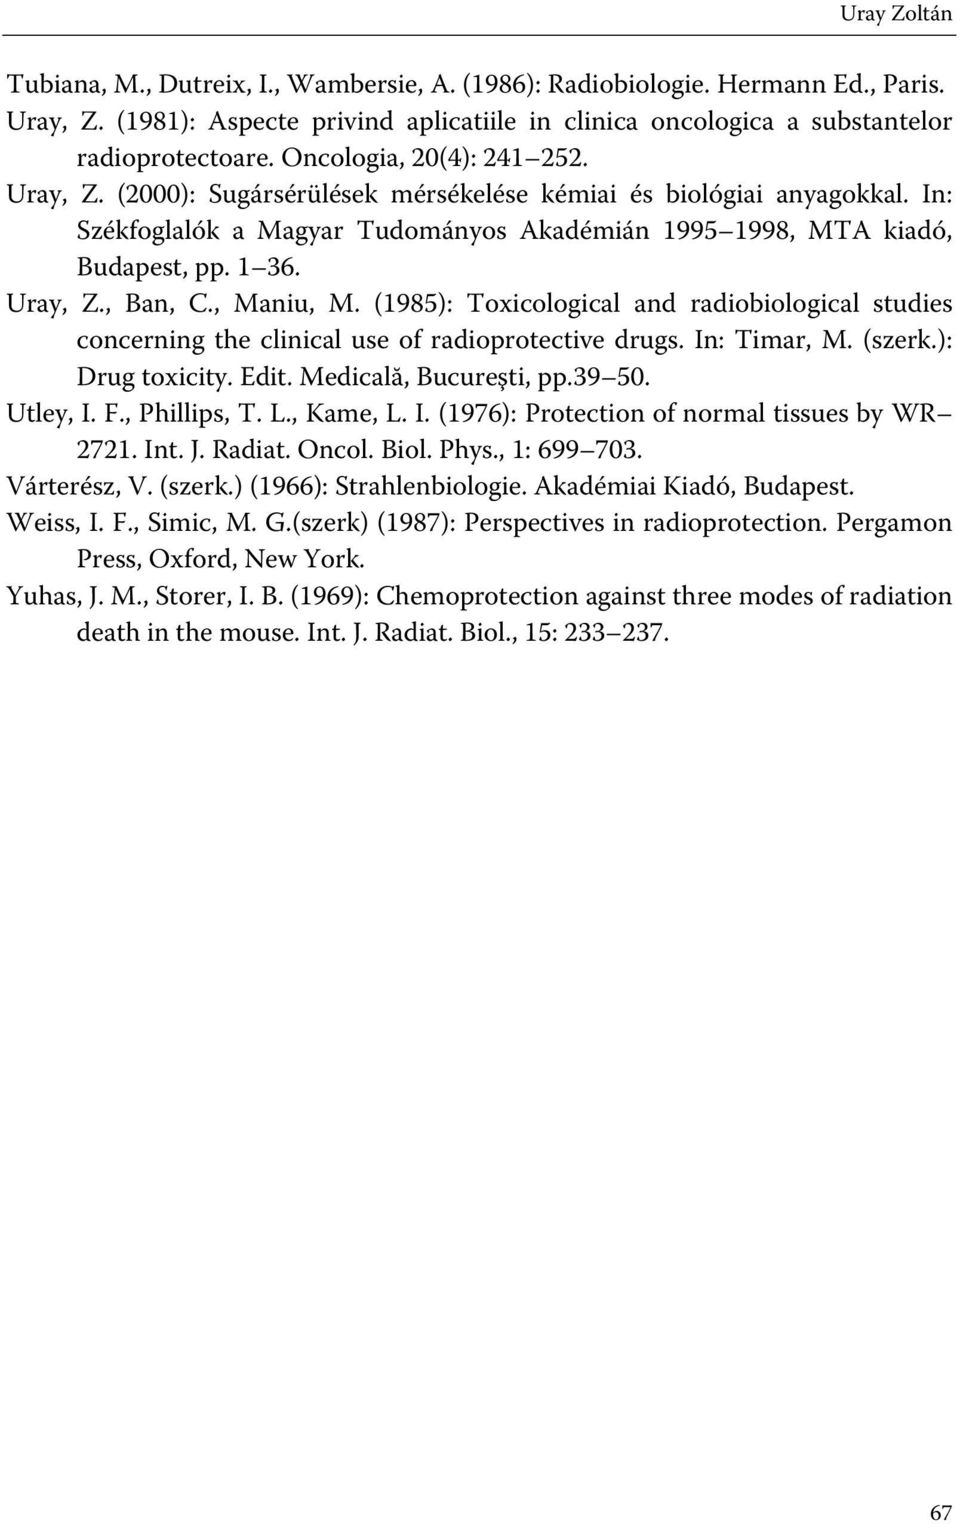 , Maniu, M. (1985): Toxicological and radiobiological studies concerning the clinical use of radioprotective drugs. In: Timar, M. (szerk.): Drug toxicity. Edit. Medicală, Bucureşti, pp.39 50.